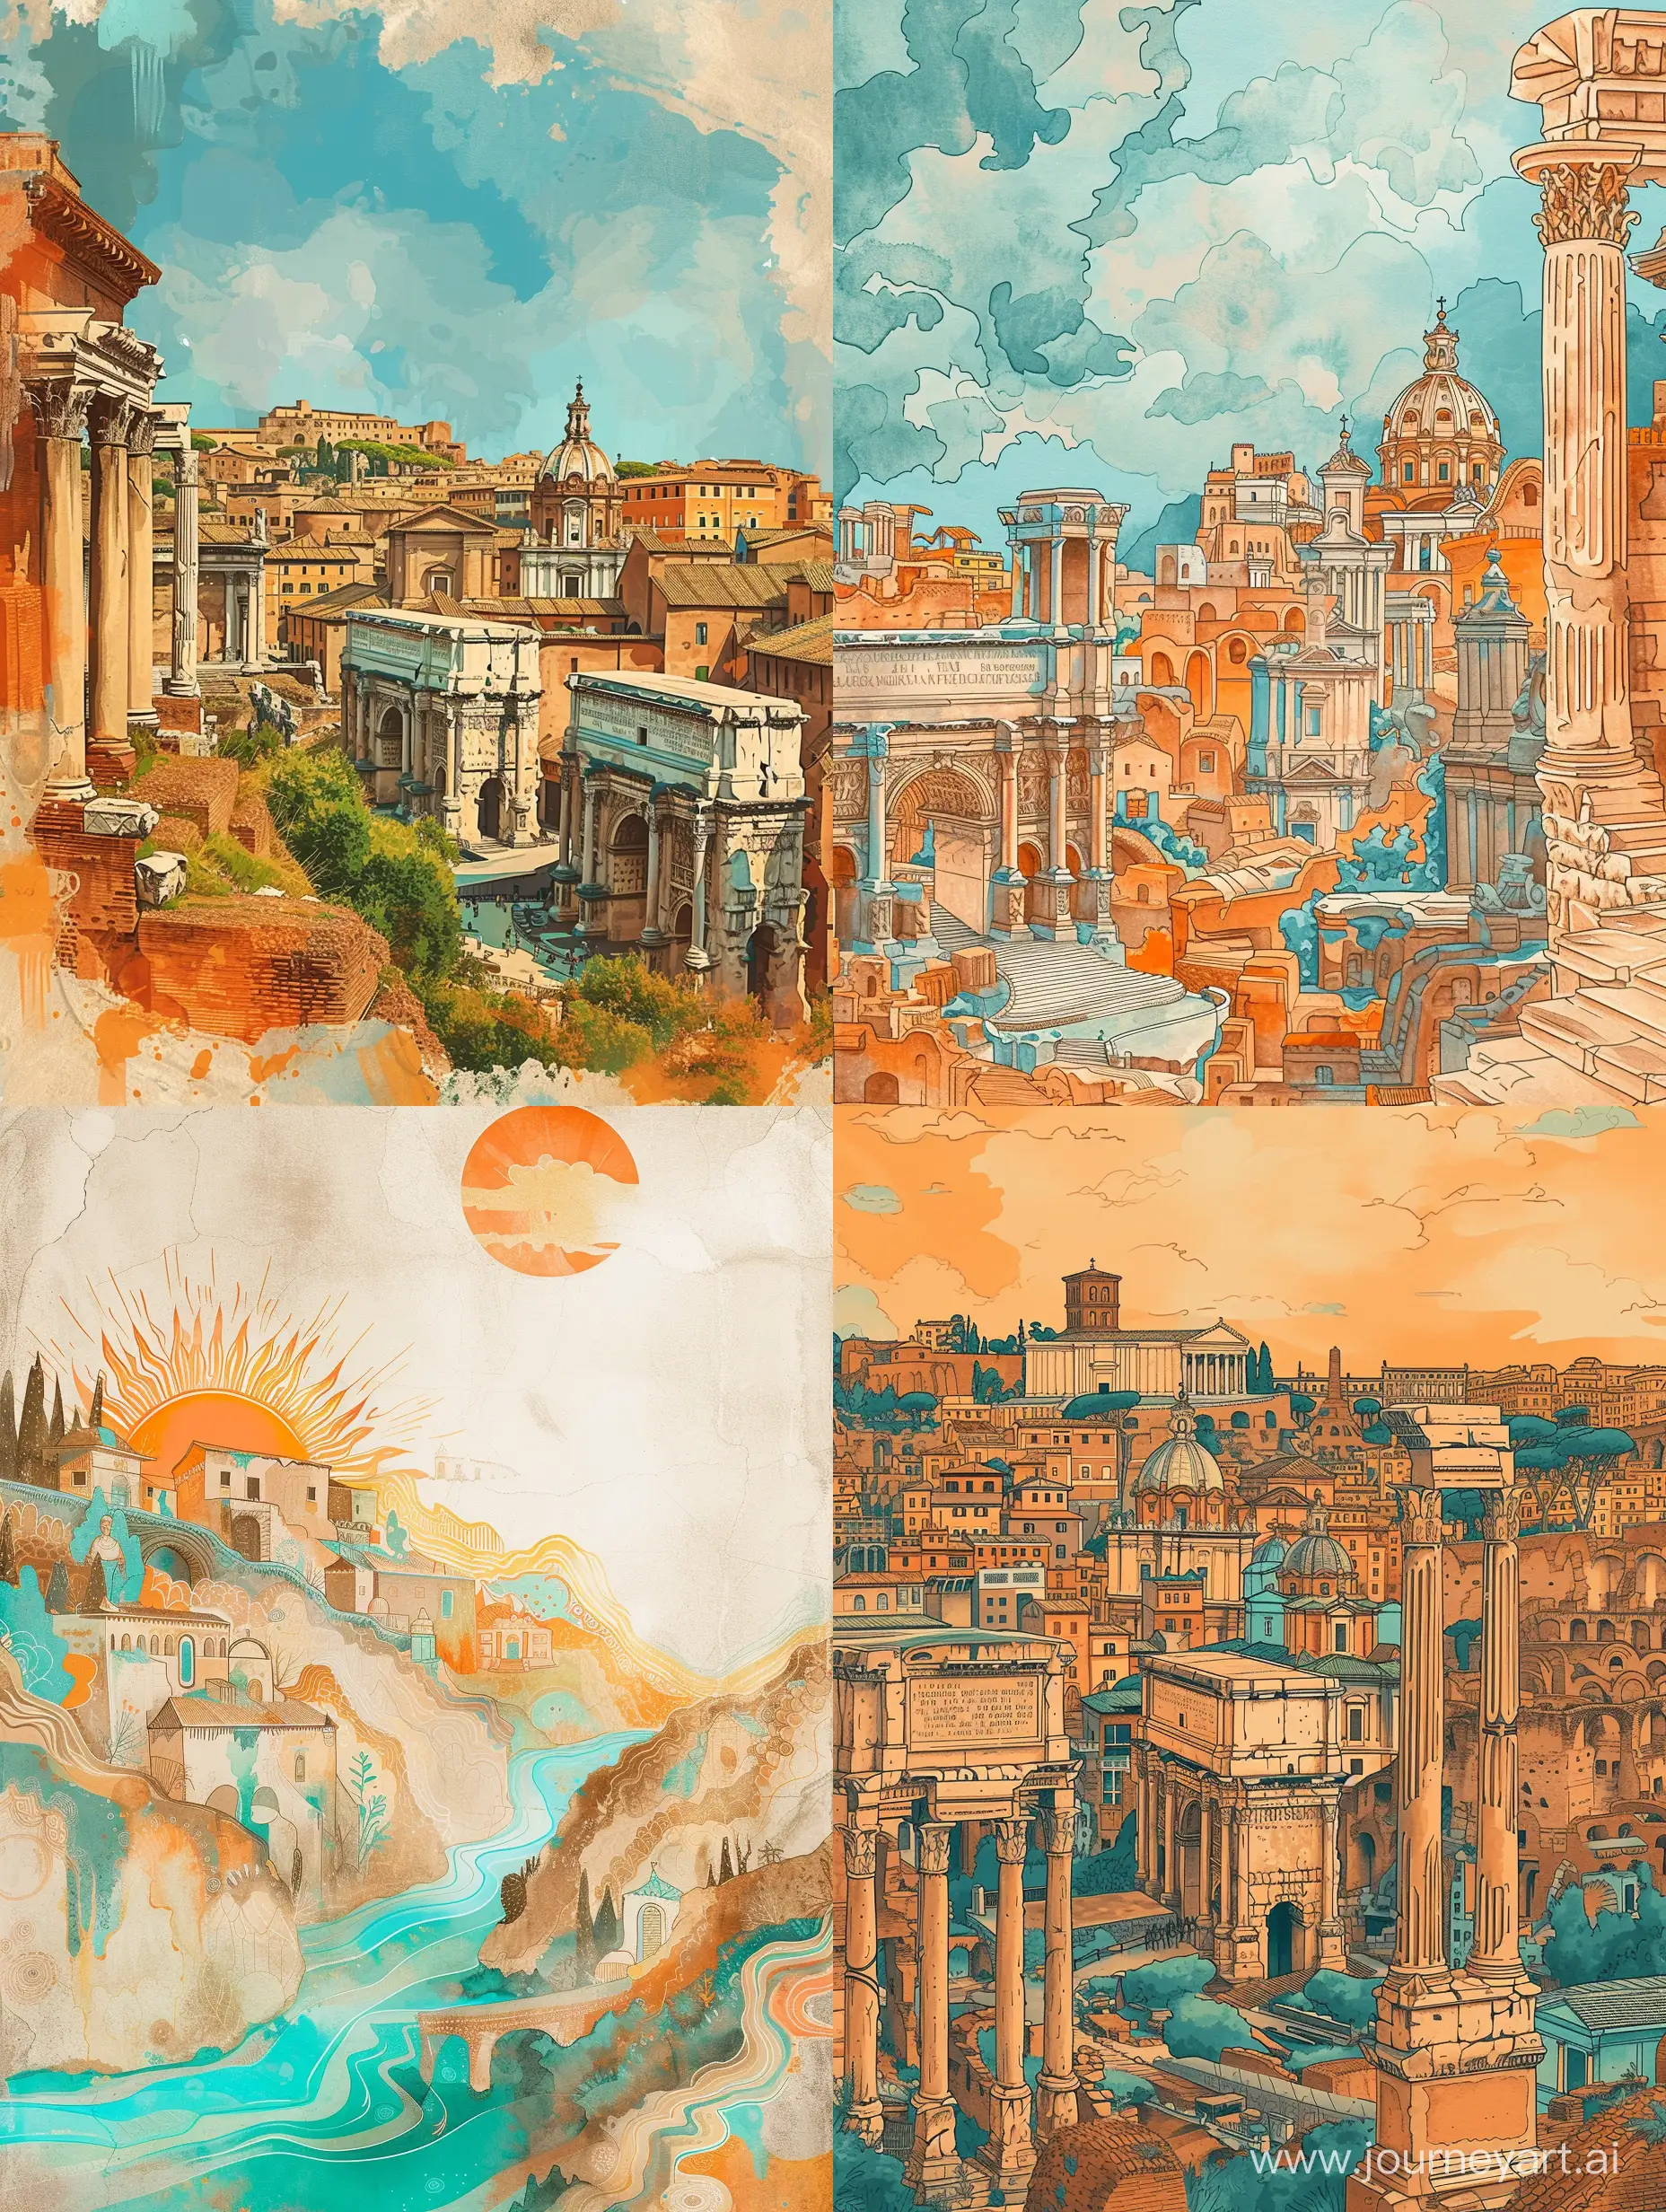 the ornamental background, landscape of the ancient civilization of Roma, in the old style, delicate, transparent colors, linear, many details, colors of ochre, orange, turquoise, light brown, blue, stylized caricature, watercolor, decorative, flat drawing